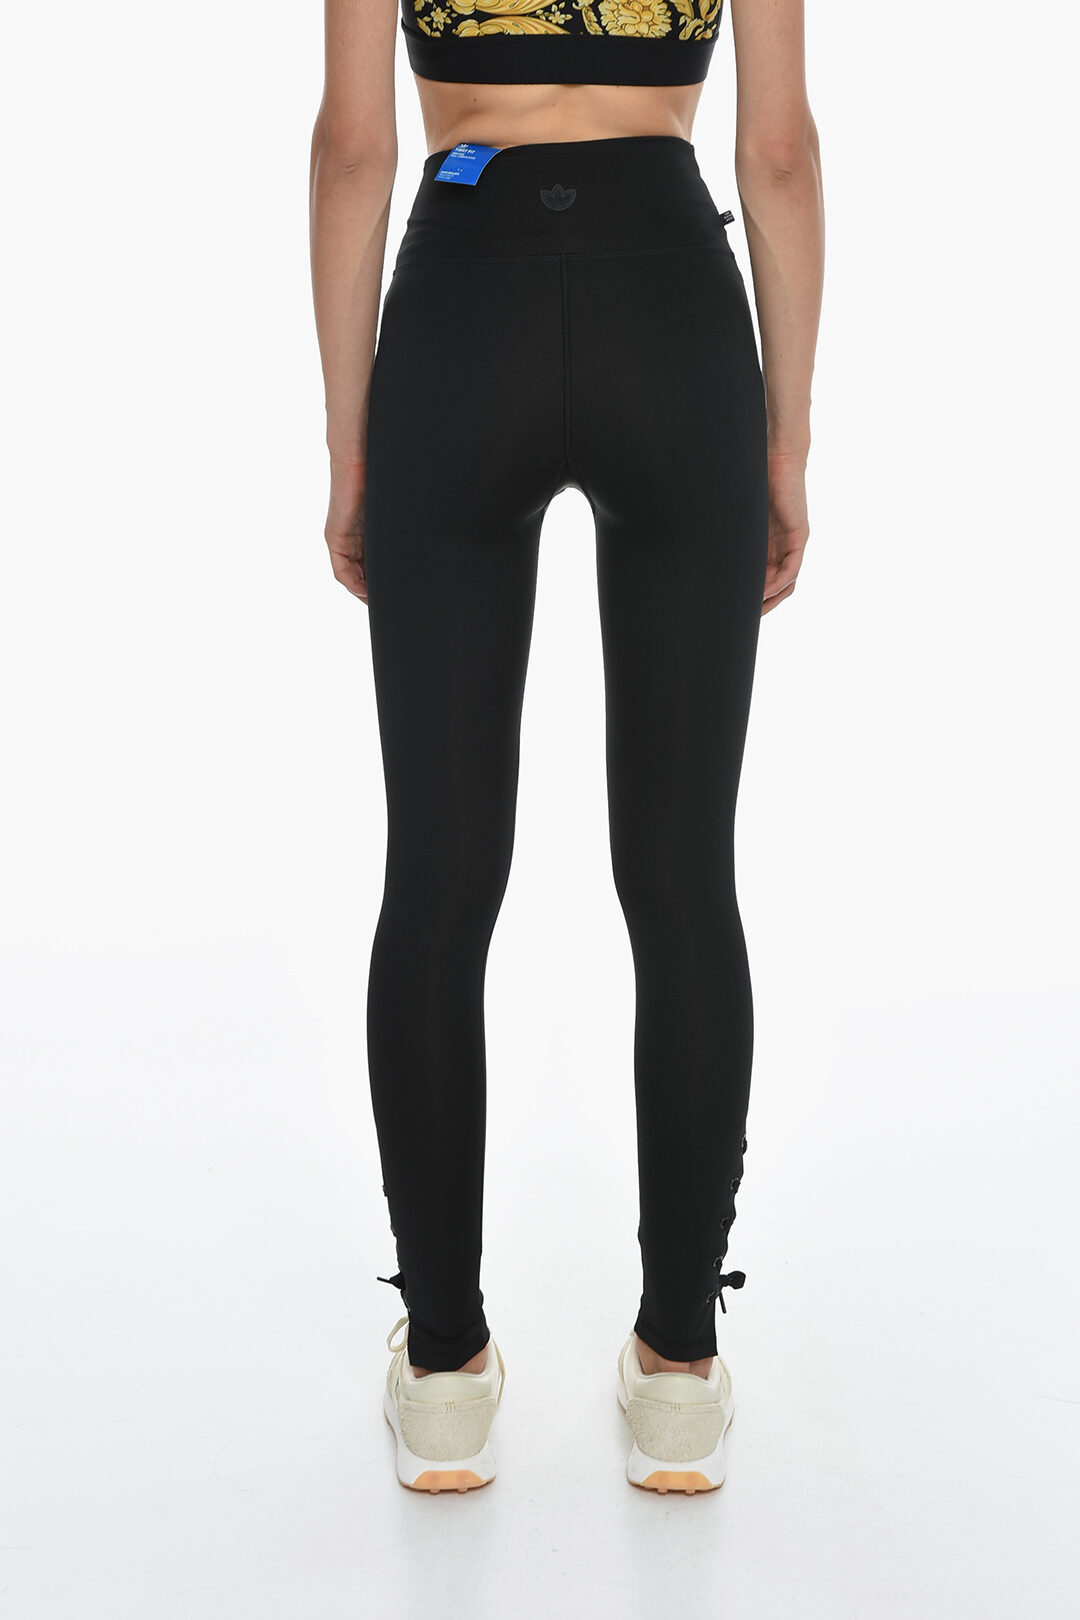 Athletic Lace Up Leggings